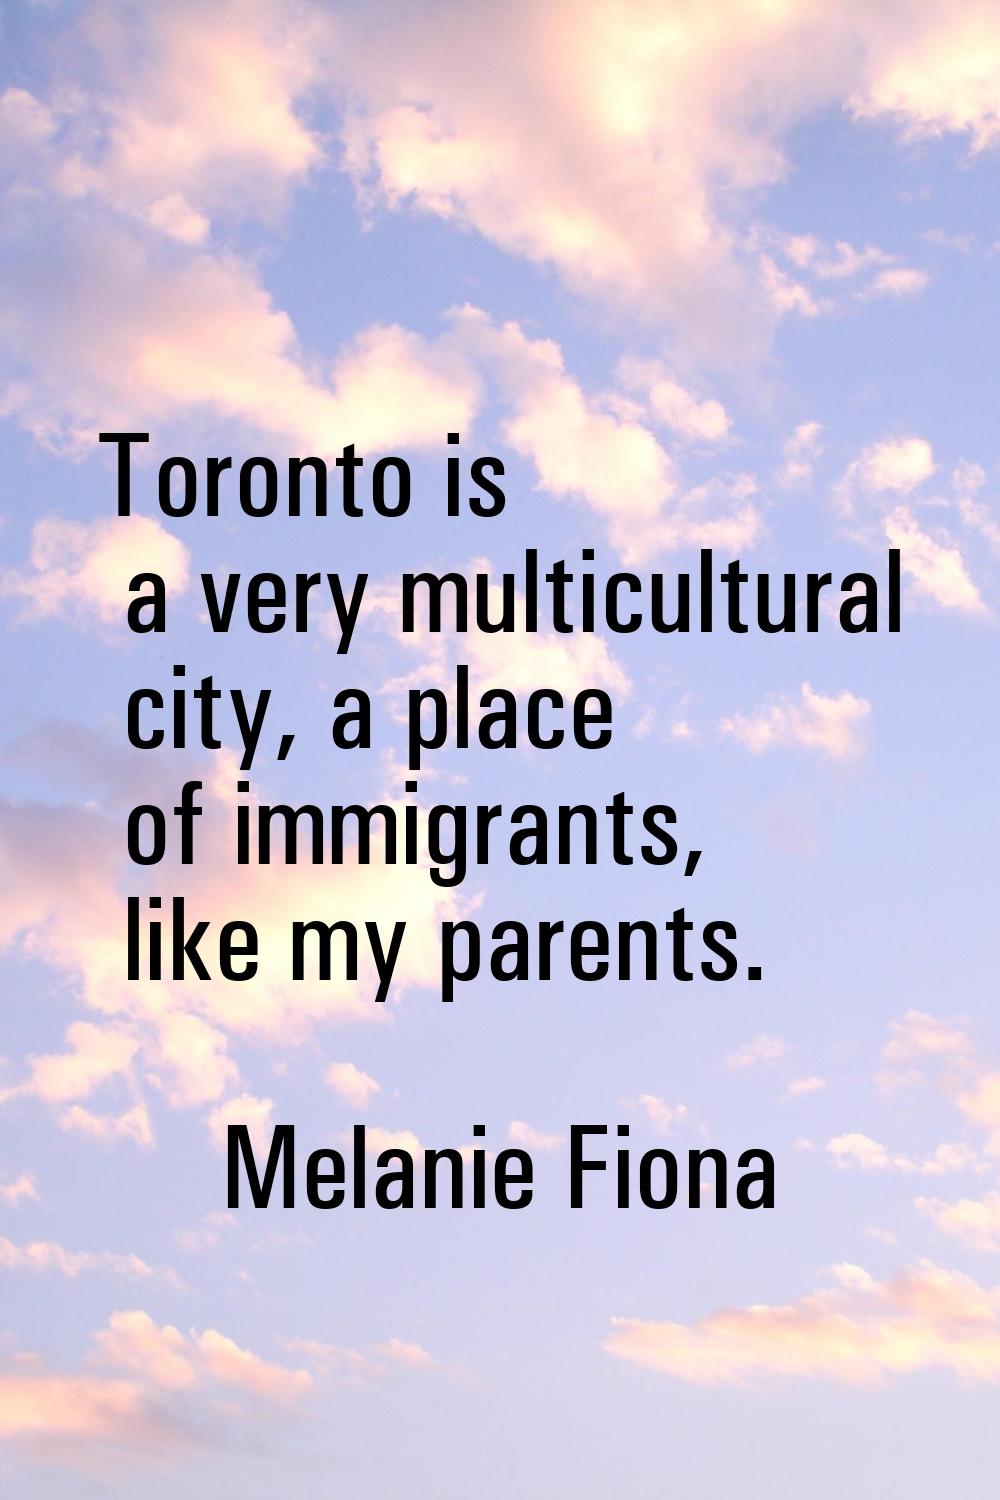 Toronto is a very multicultural city, a place of immigrants, like my parents.